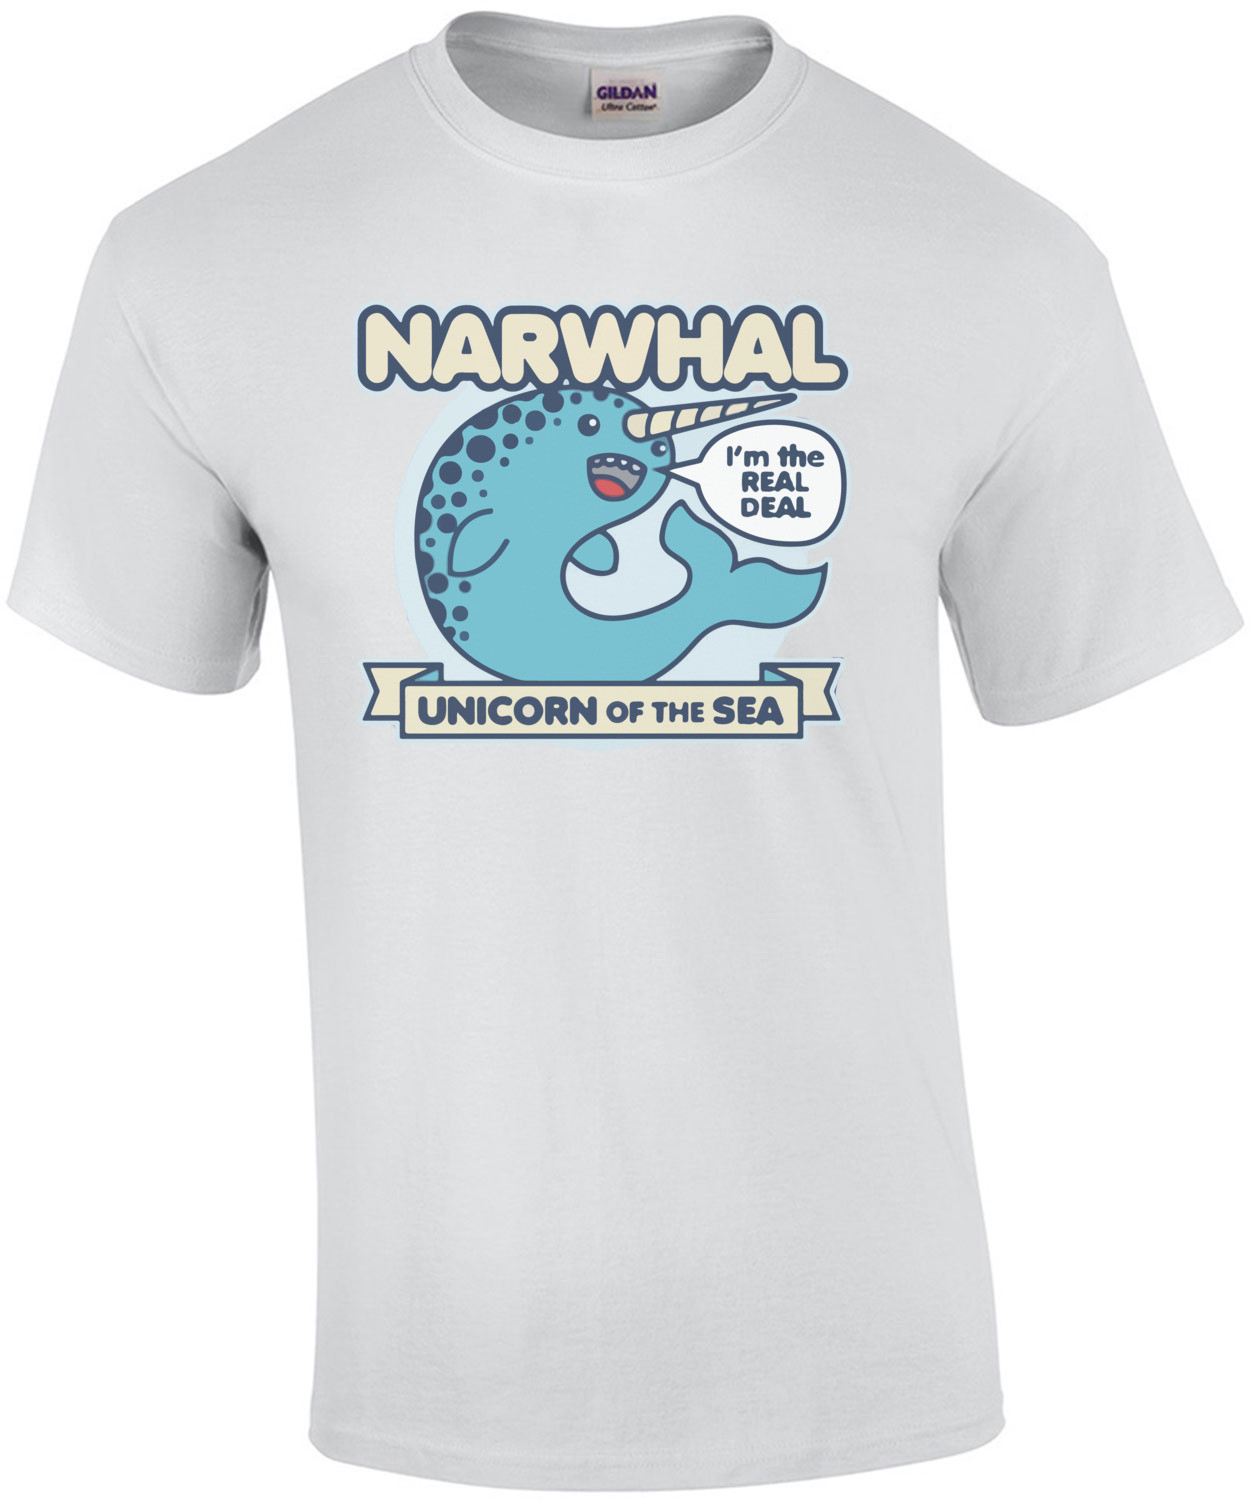 Narwhal Unicorn Of The Sea - Funny